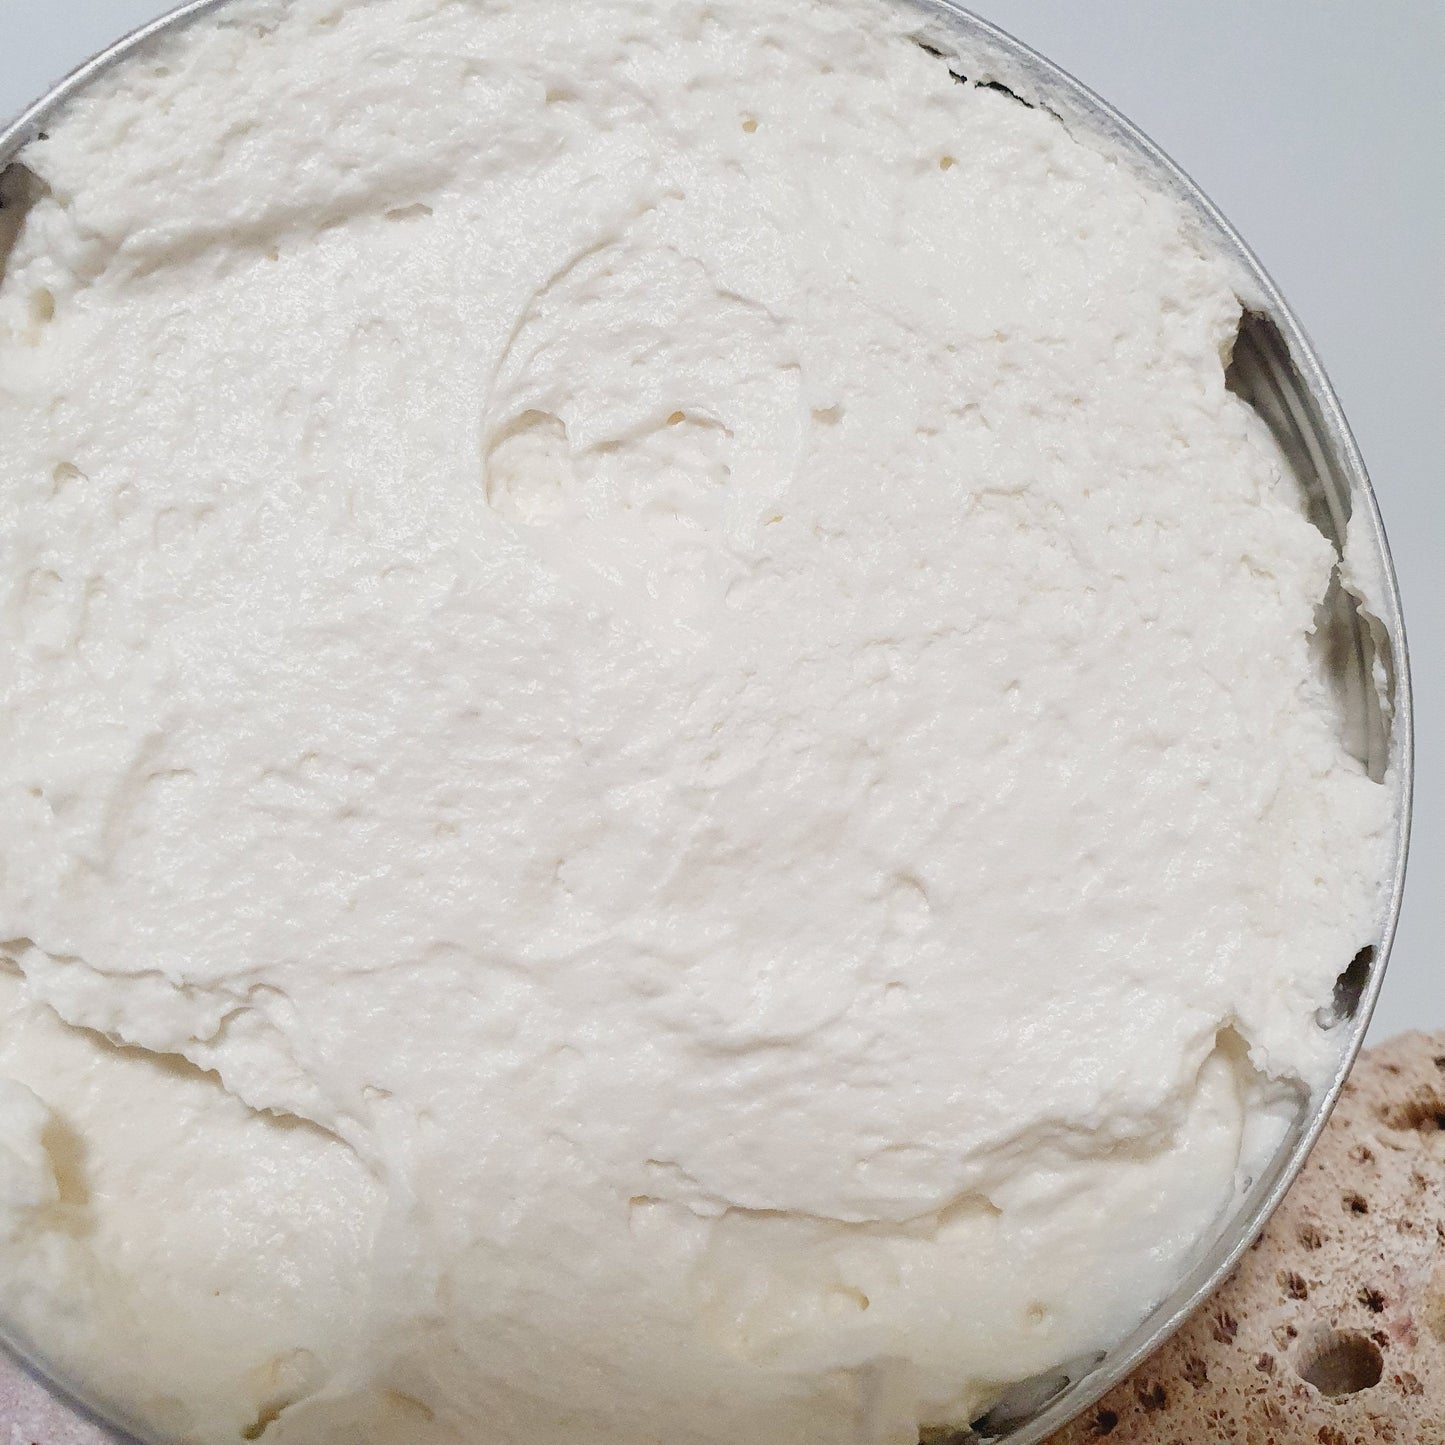 Rose Geranium scented whipped Shea body butter